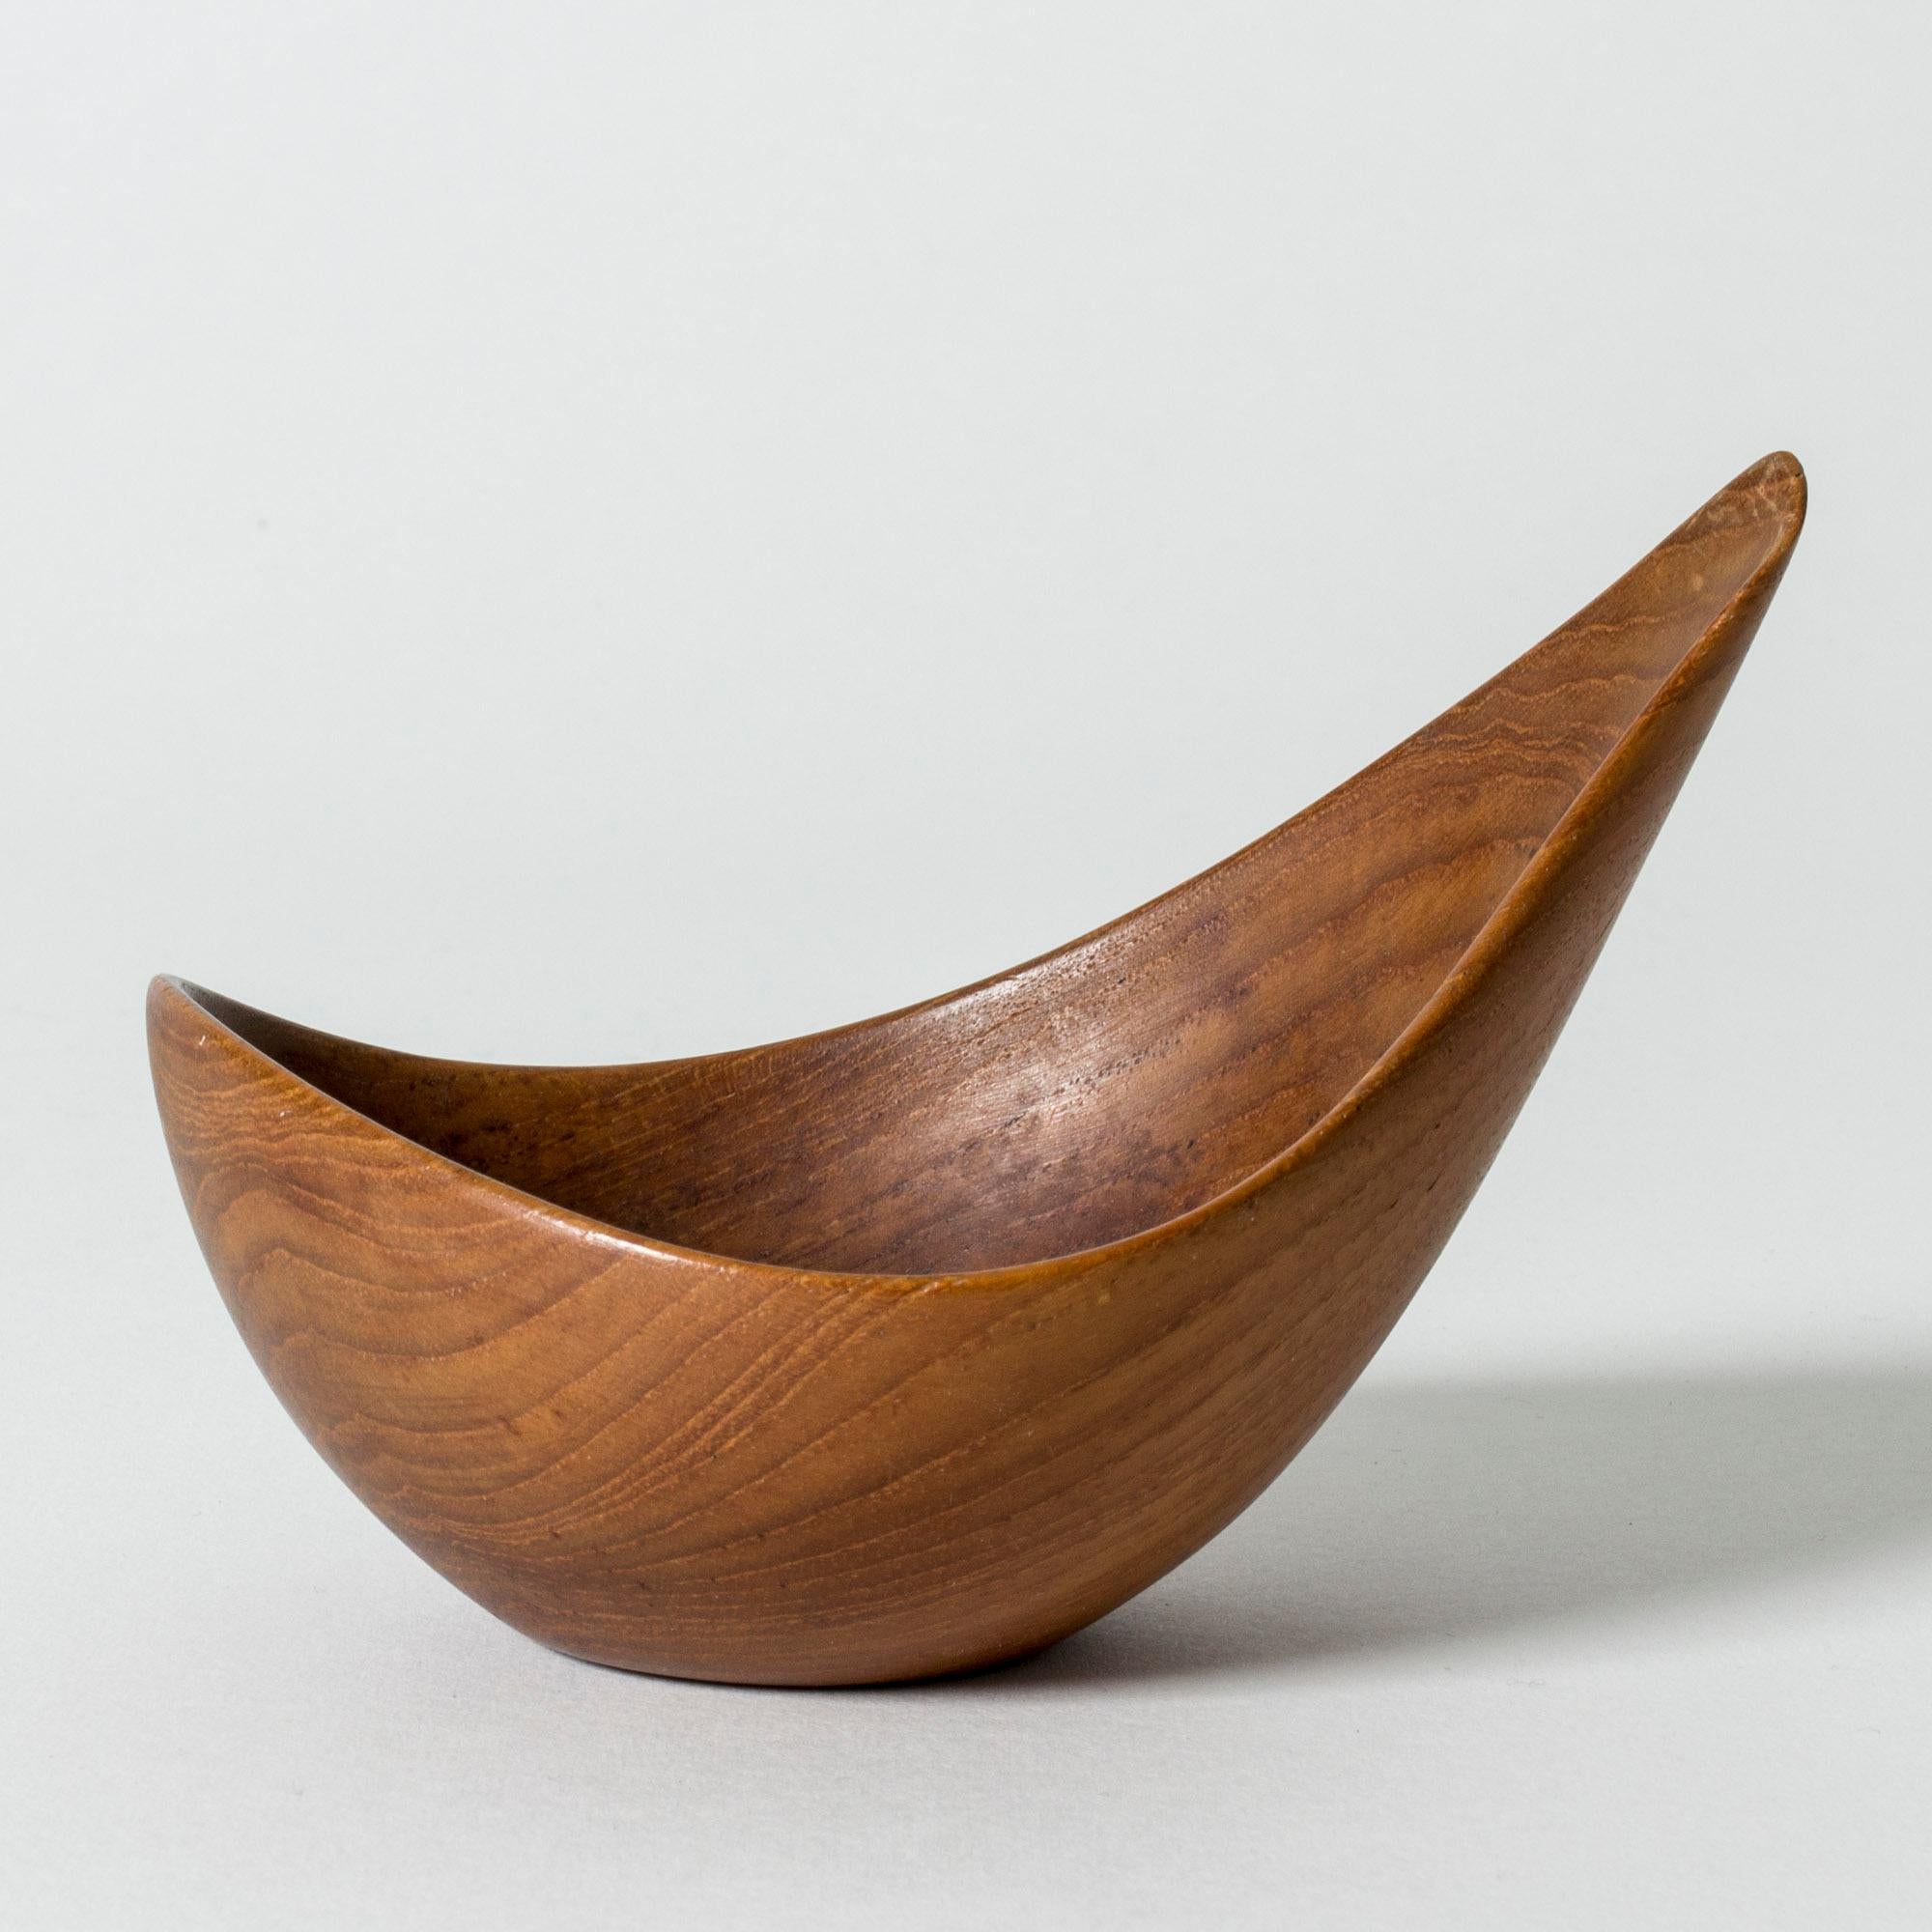 Lovely bowl by Johnny Mattsson, sculpted from teak in a drop-like design. Playful, sculptural form.